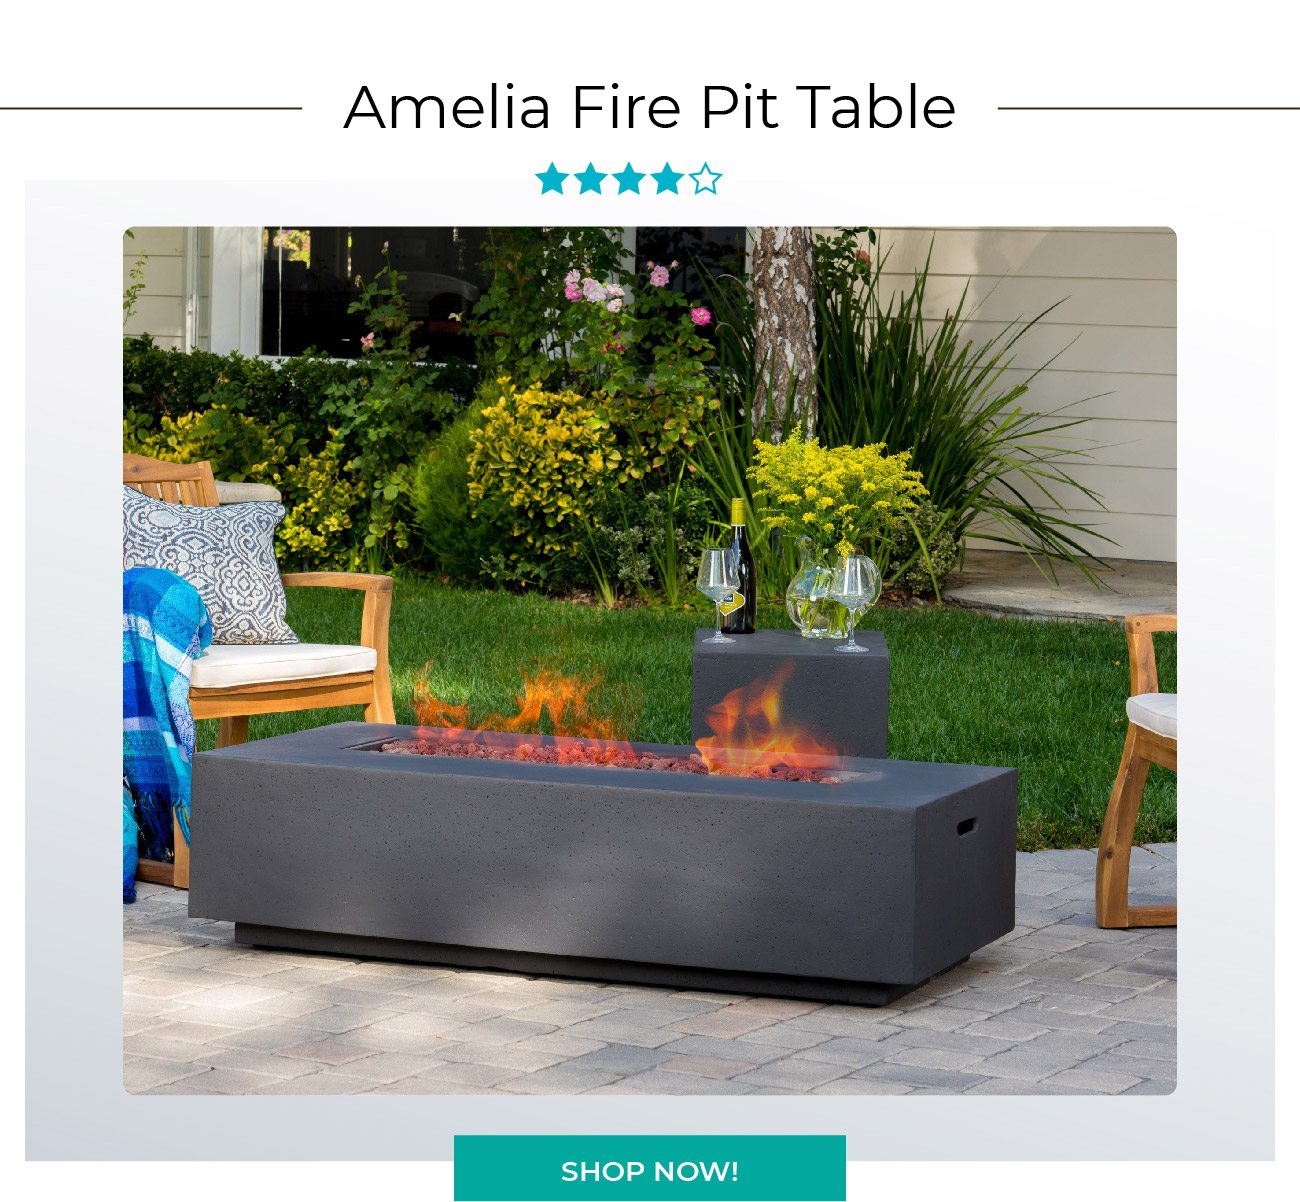 Amelia Fire Pit Table